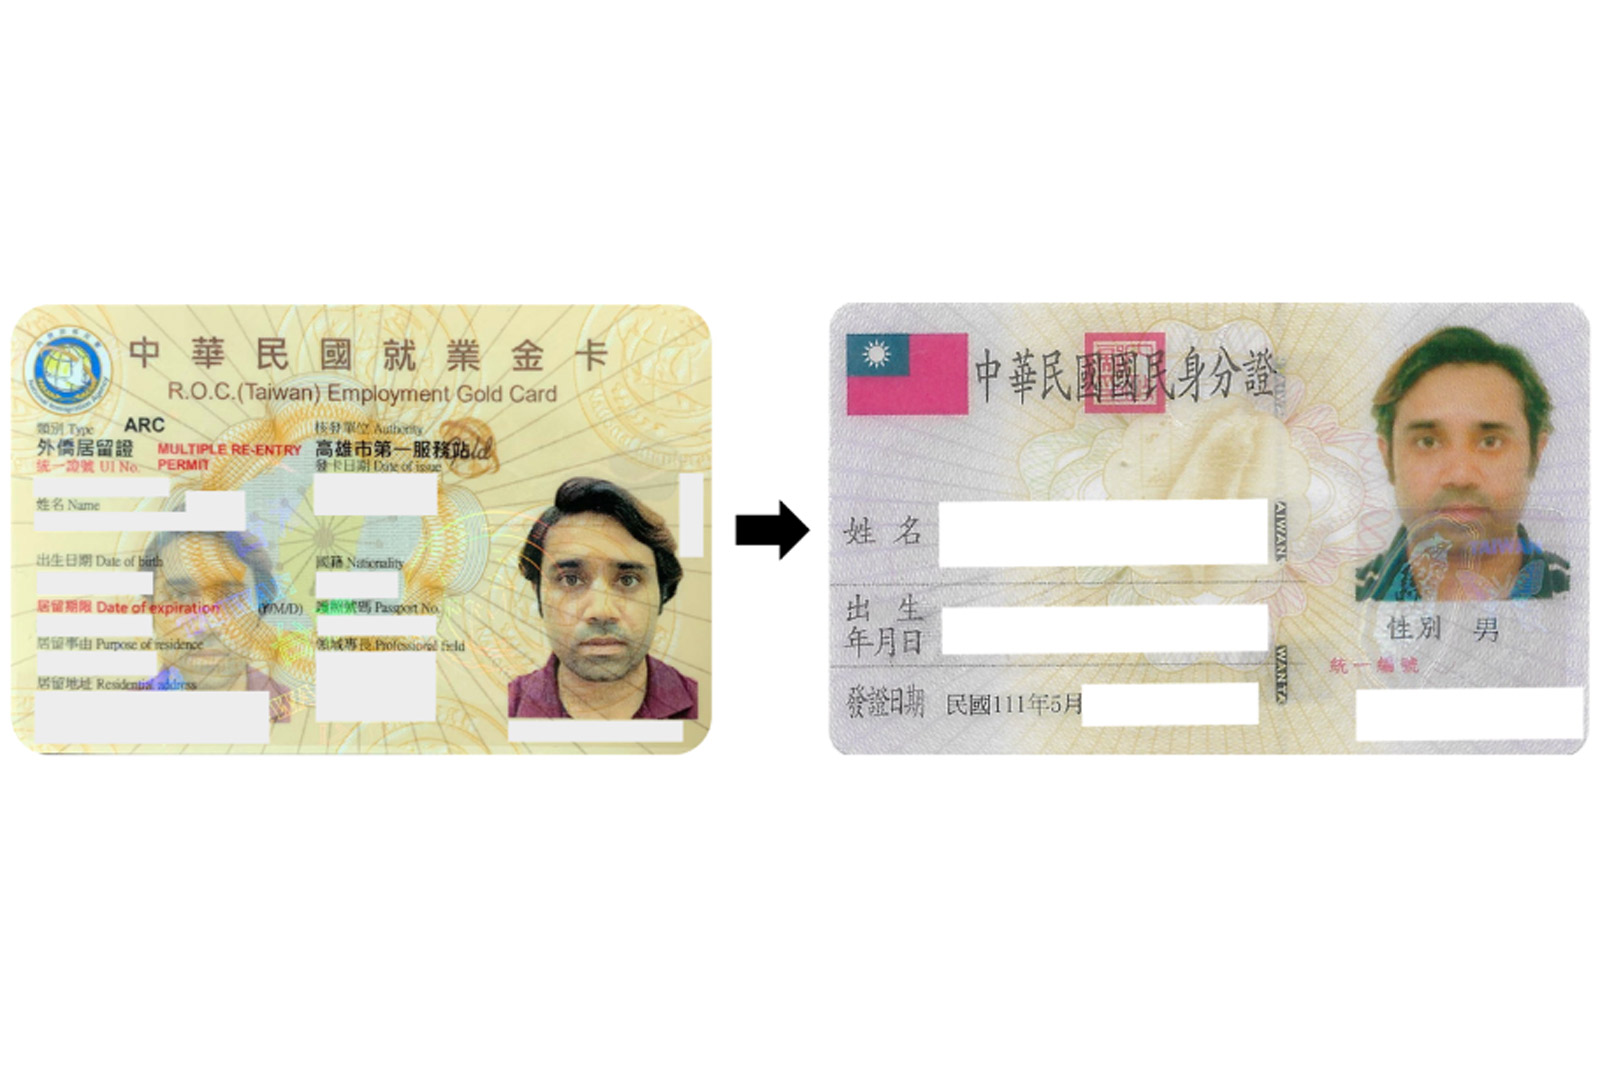 From Taiwan Gold Card to Taiwanese citizenship